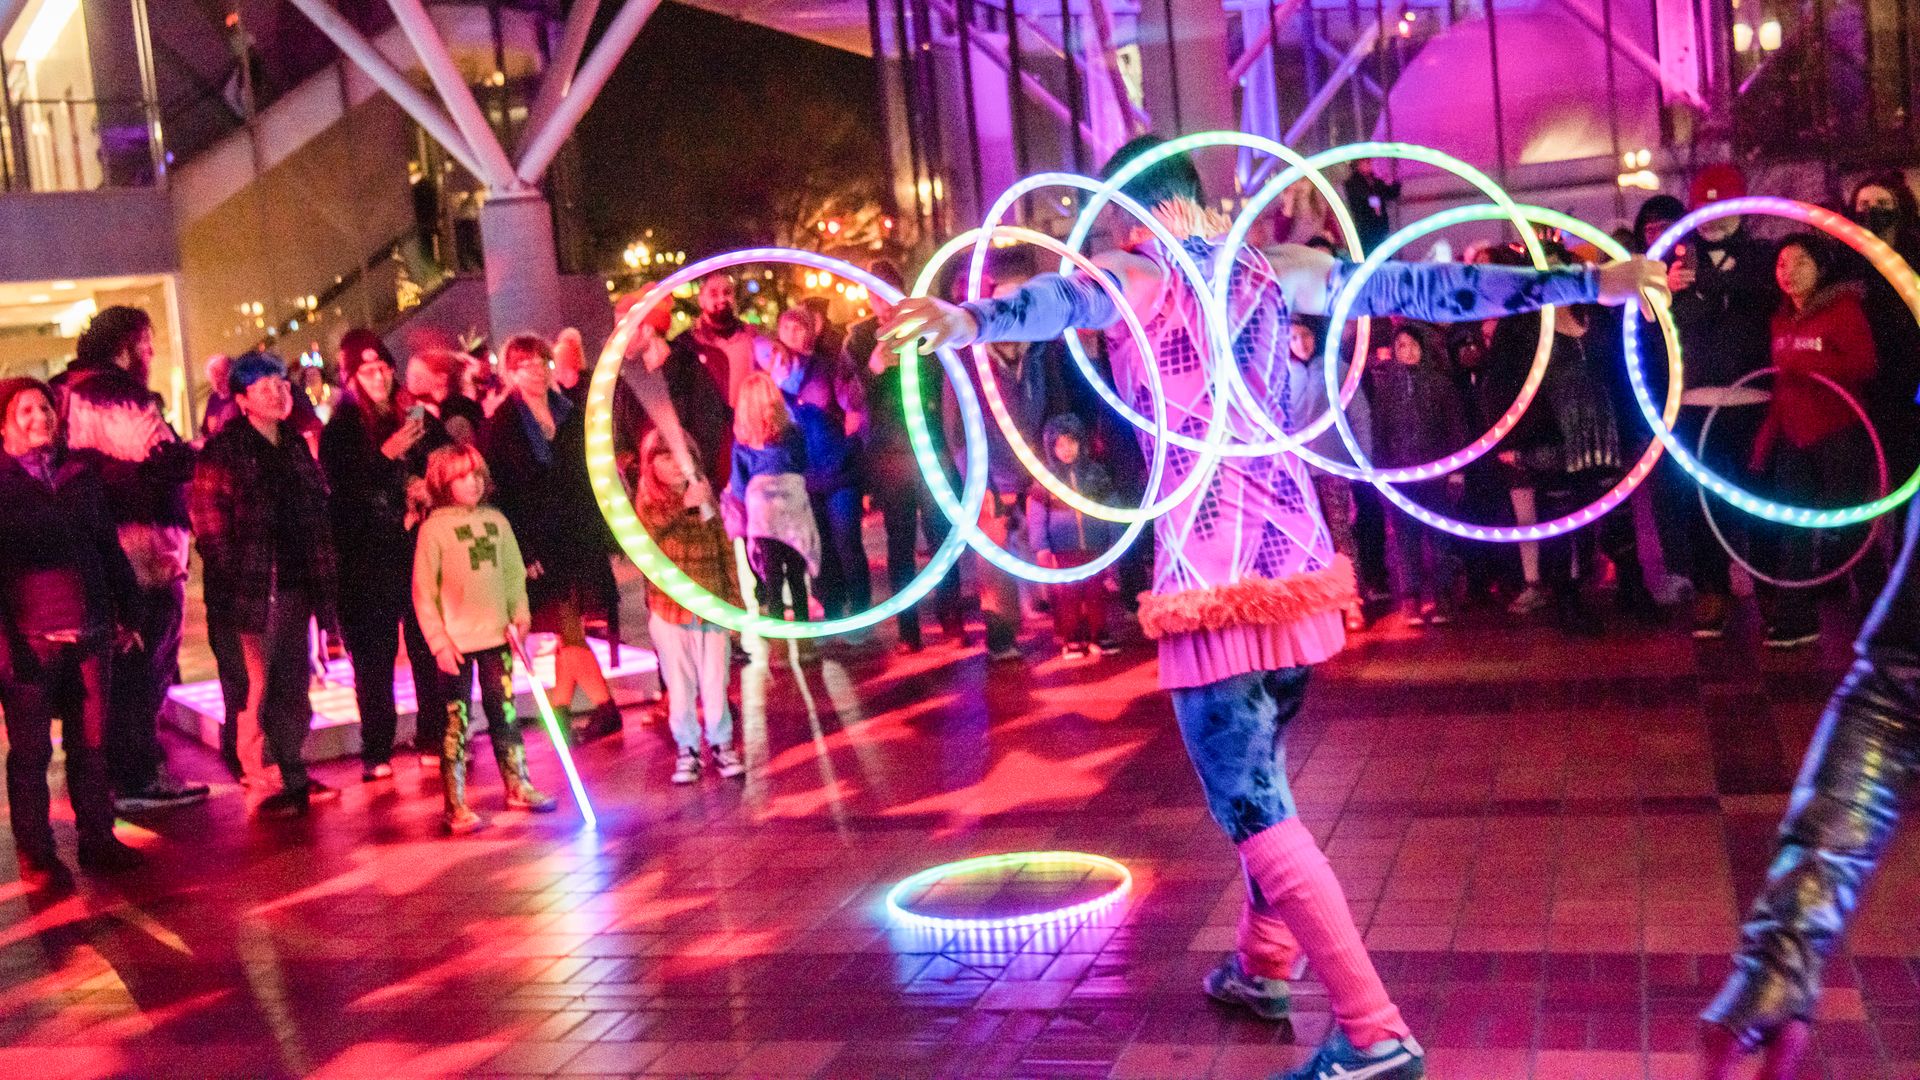 A crowd at night watches a woman spinning illuminated hoops.